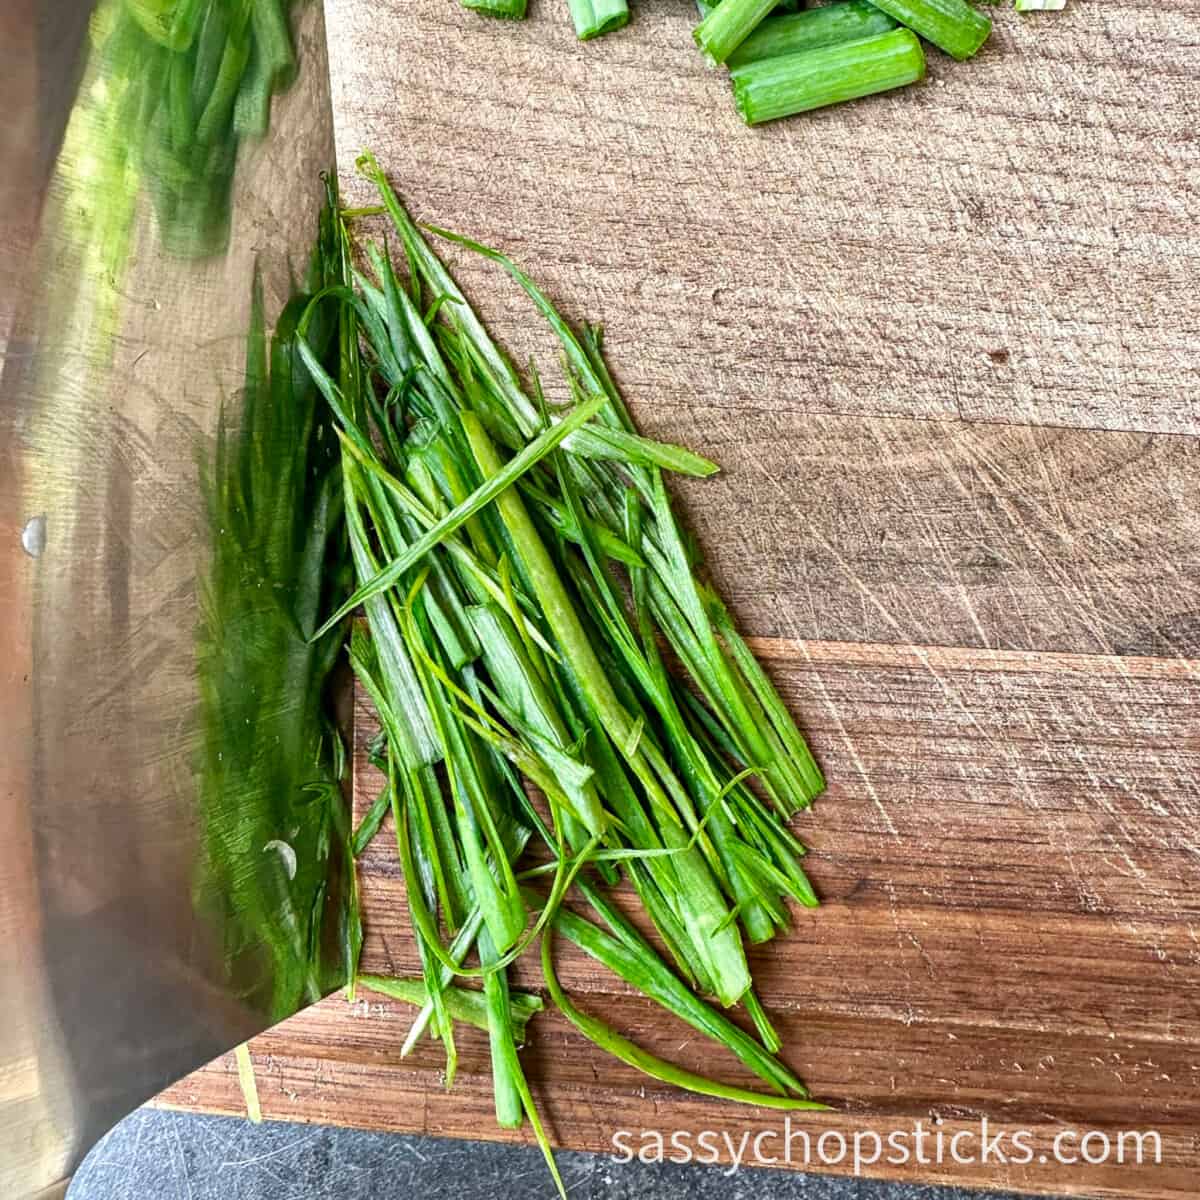 how to cut green onions-way 4